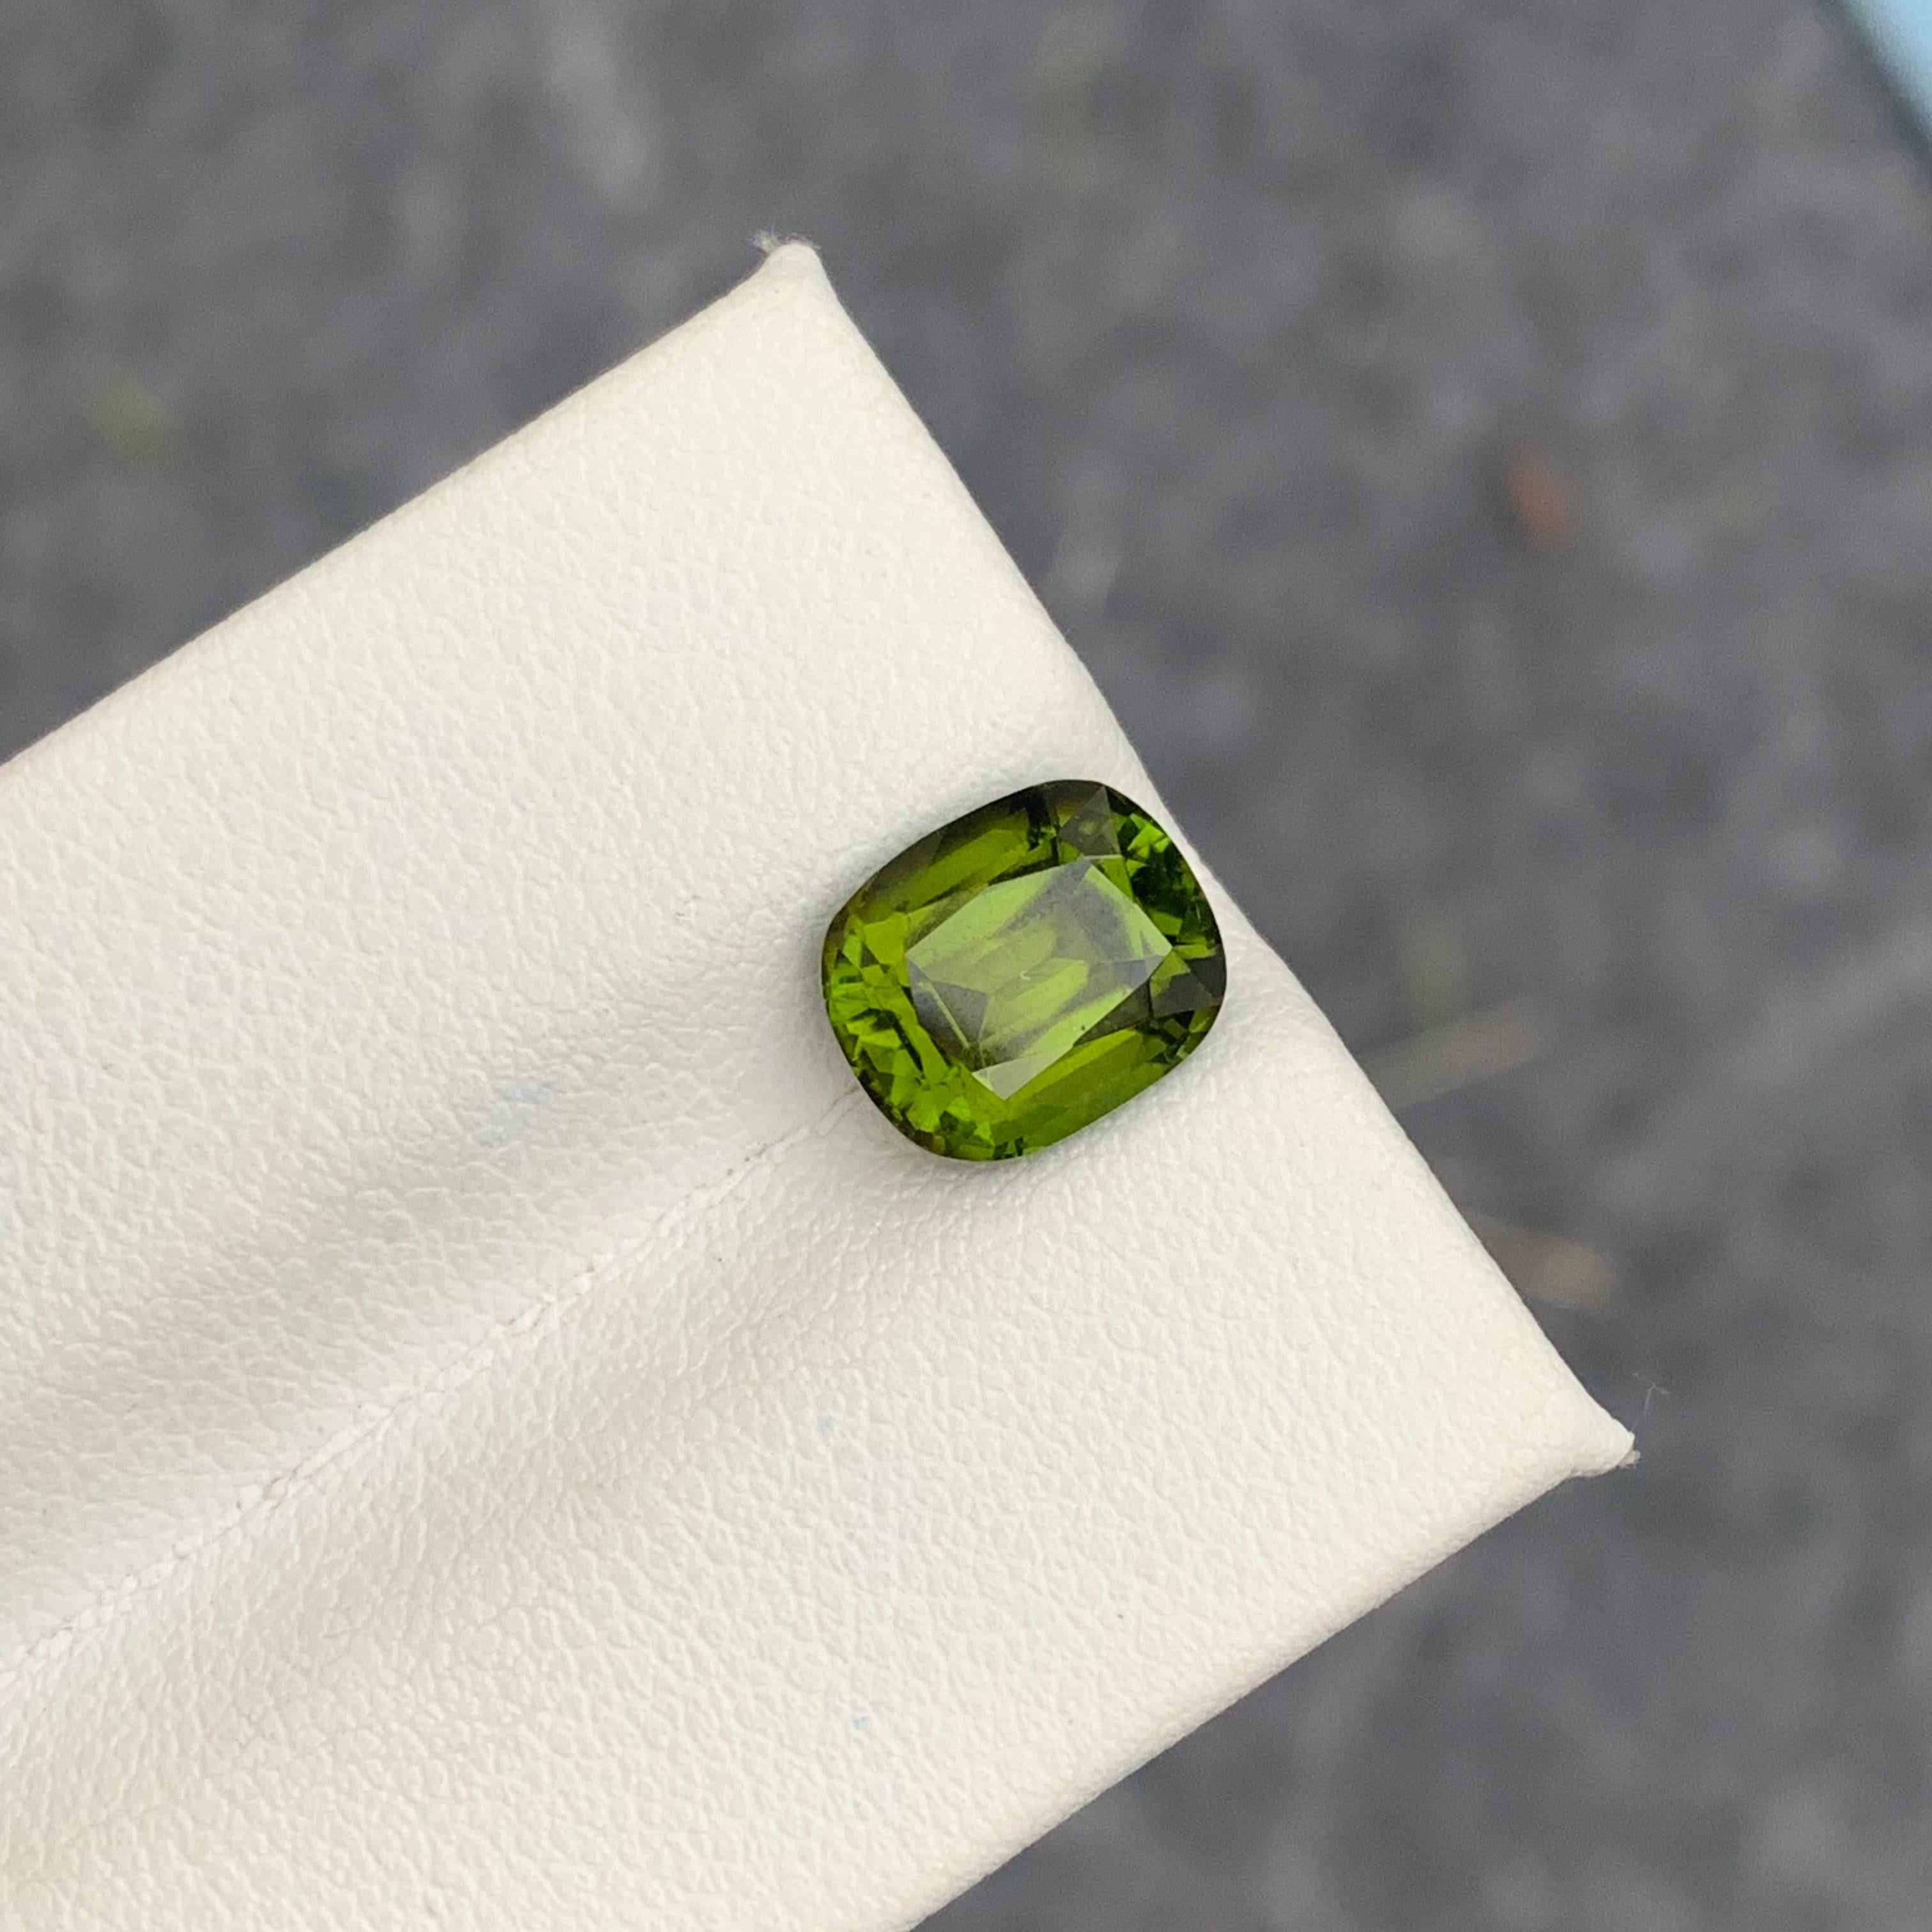 Gemstone Type : Tourmaline
Weight : 2.95 Carats
Dimensions :9.1x7.7x5.8 Mm
Origin : Kunar Afghanistan
Clarity : Eye Clean
Shape: Cushion
Color: Olive Green
Certificate: On Demand
Basically, mint tourmalines are tourmalines with pastel hues of light